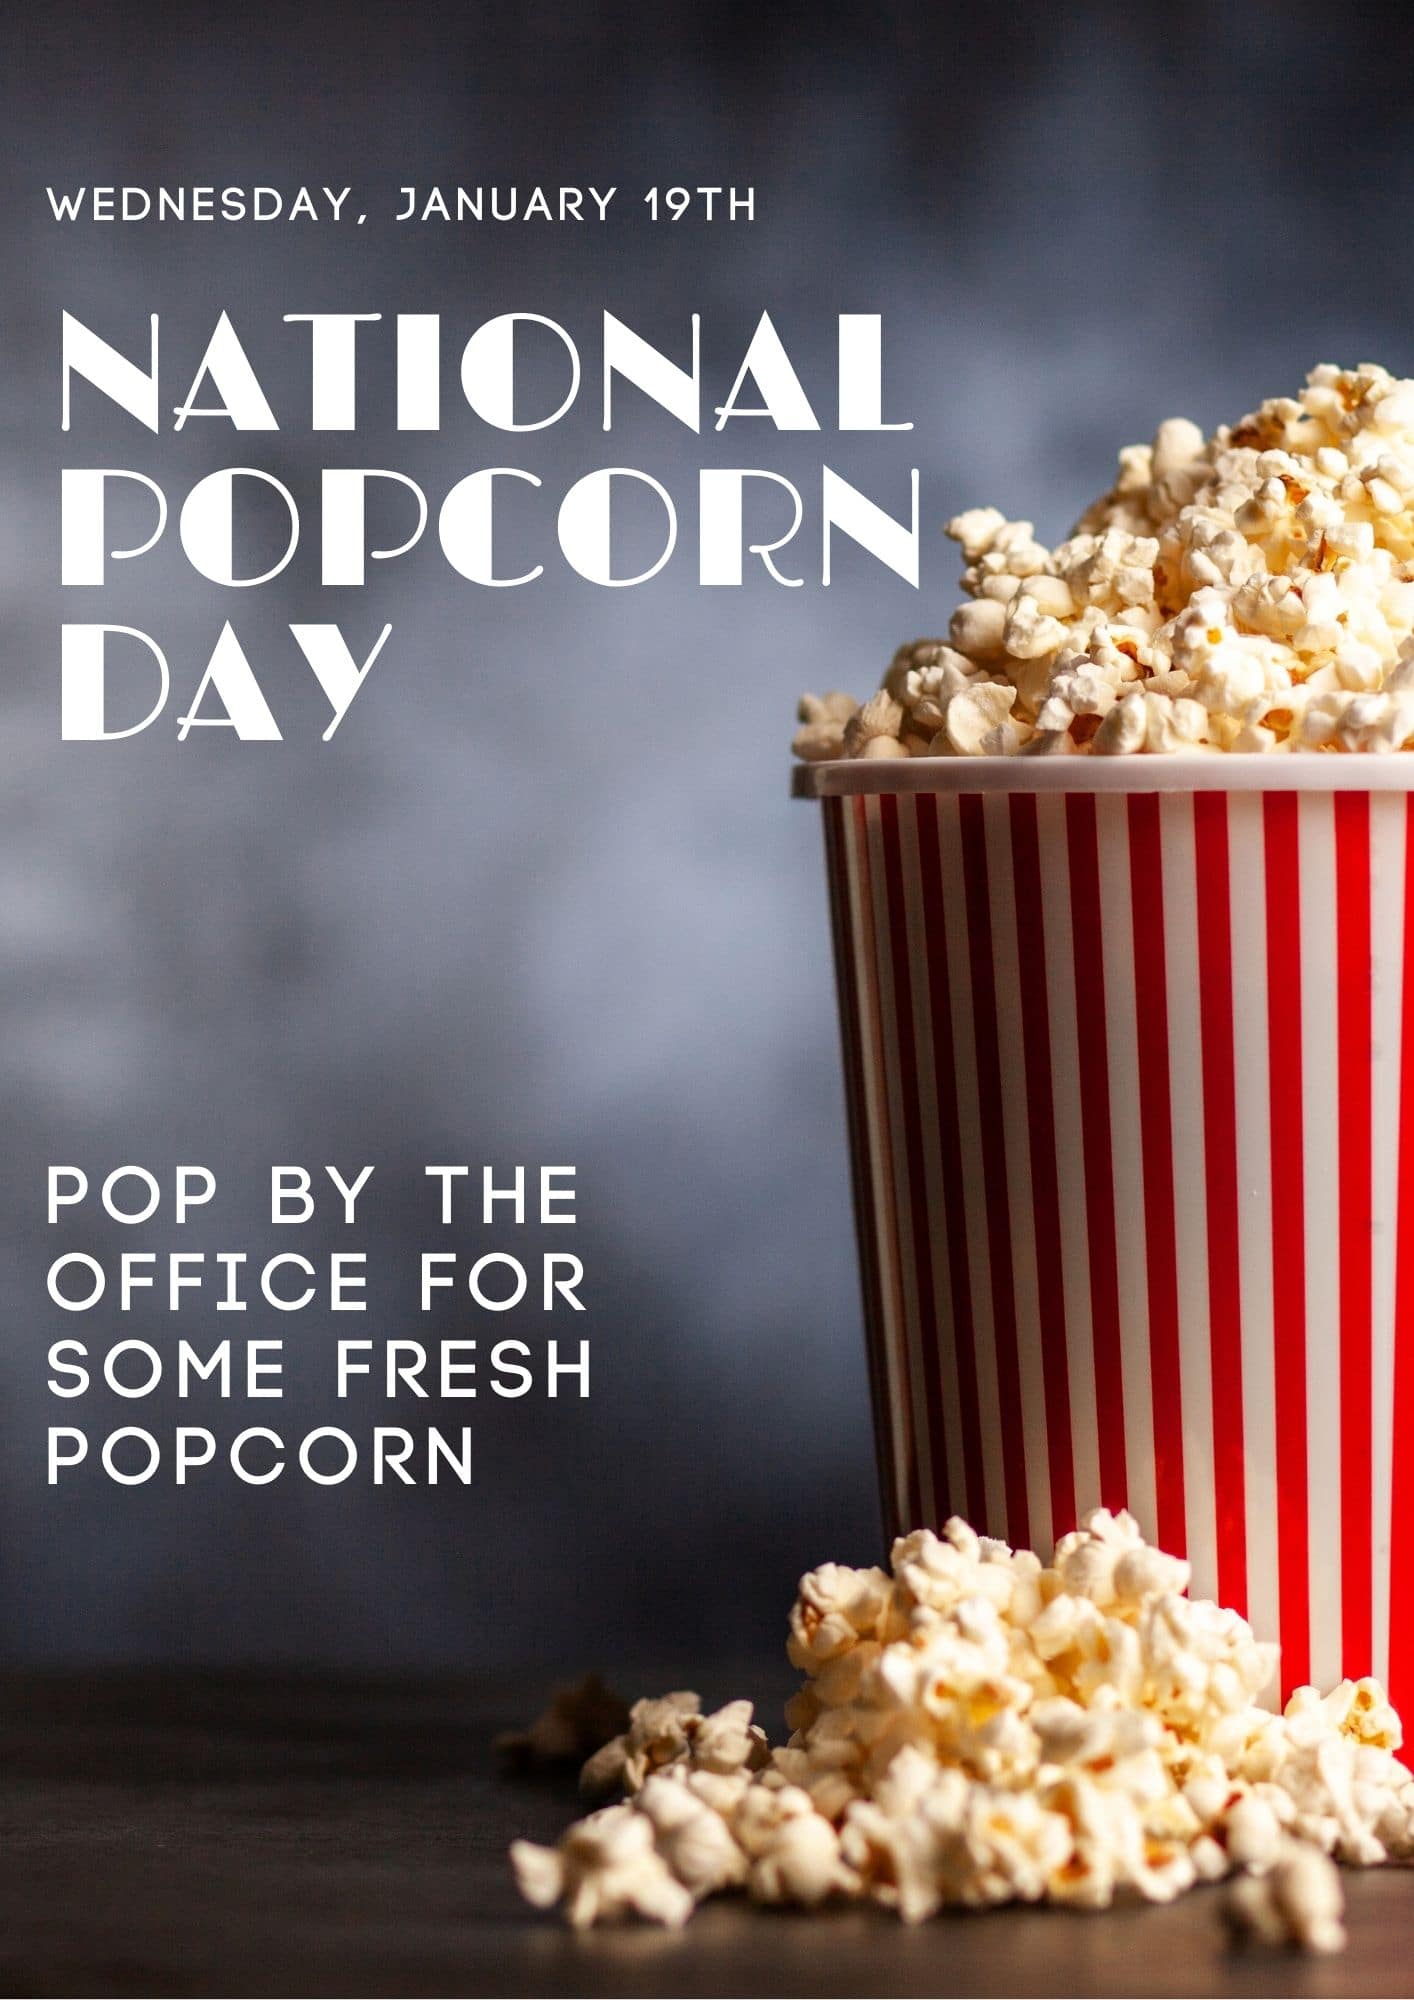 National popcorn day poster featuring Apartments in The Woodlands TX.